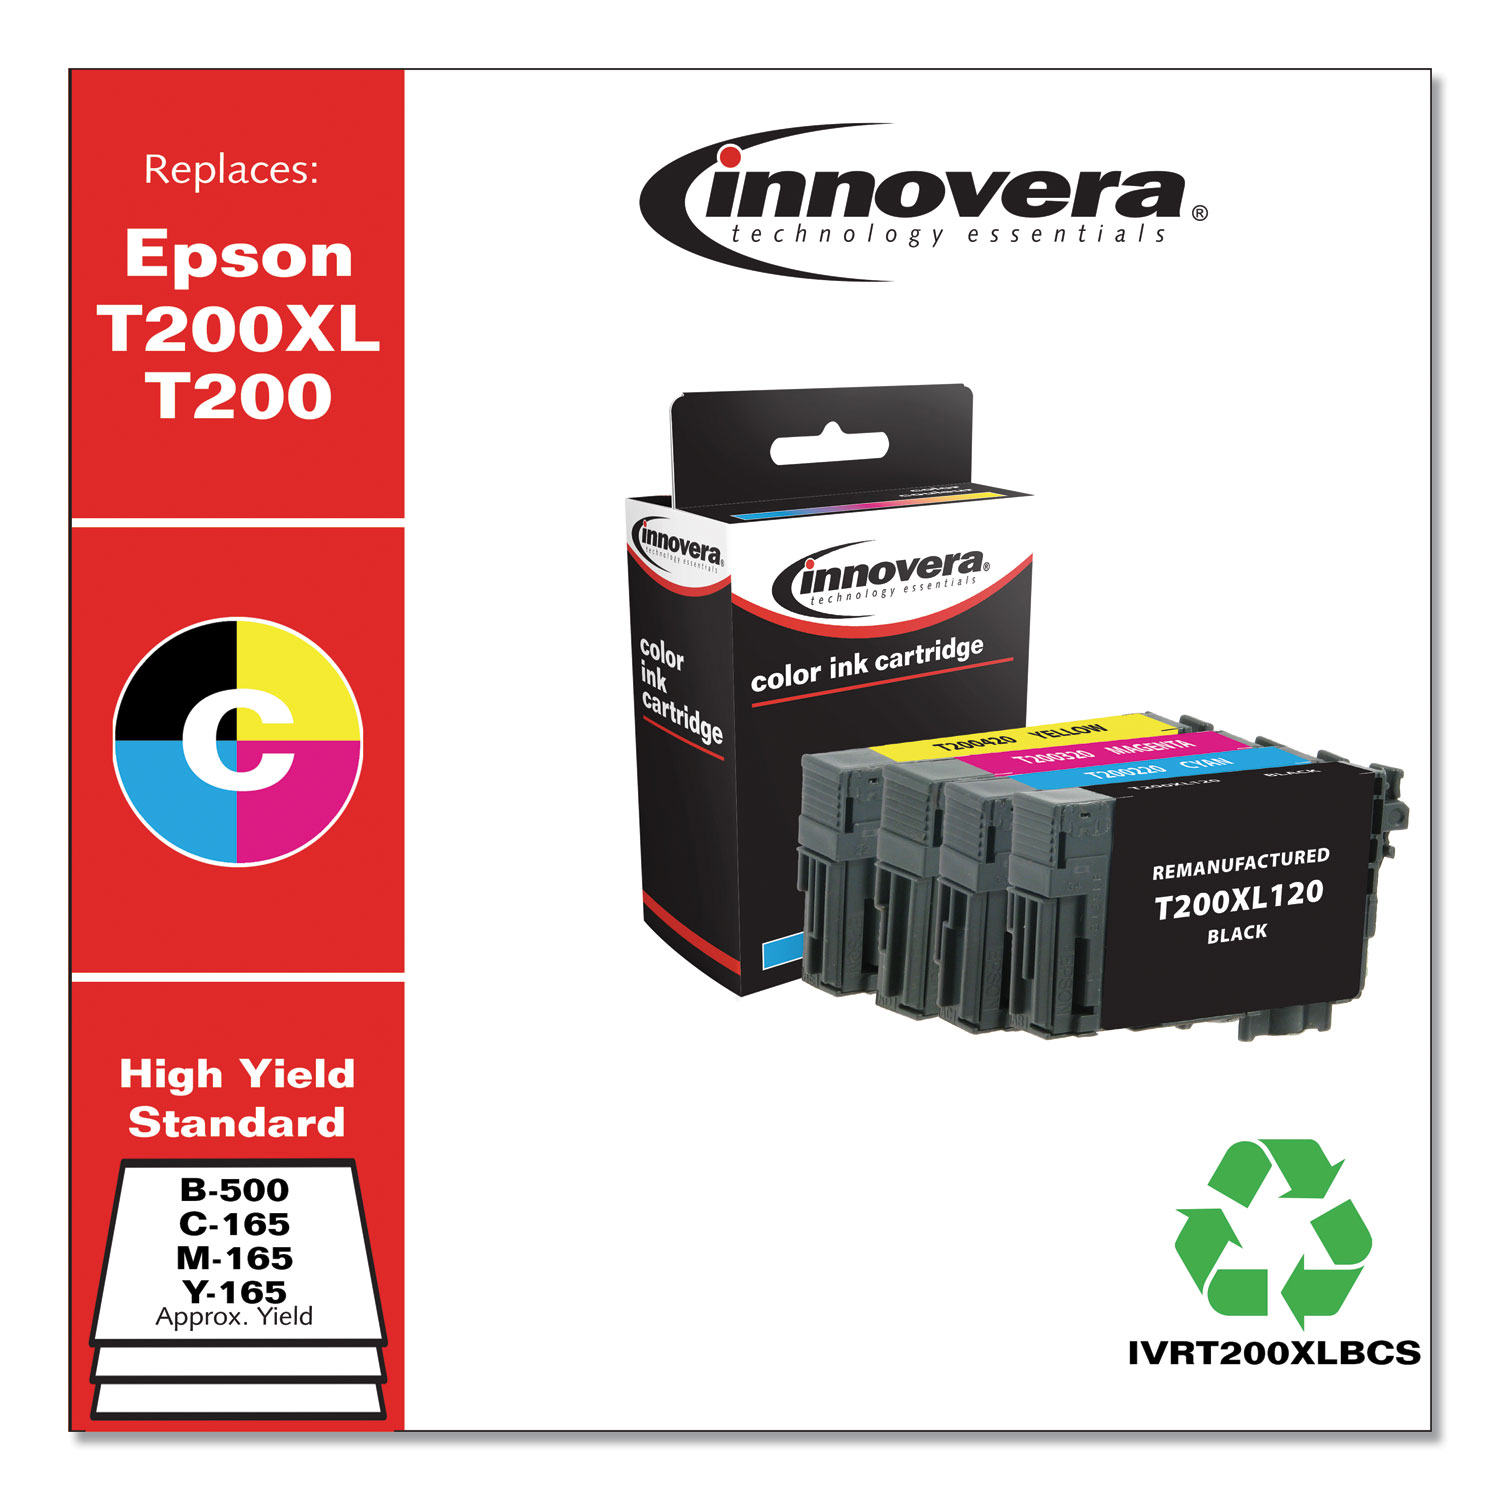  Innovera IVRT200XLBCS Remanufactured Black/Cyan/Magenta/Yellow Ink, Replacement for Epson T200XL/T200 (T200XL-BCS), 500/165 Page-Yield (IVRT200XLBCS) 